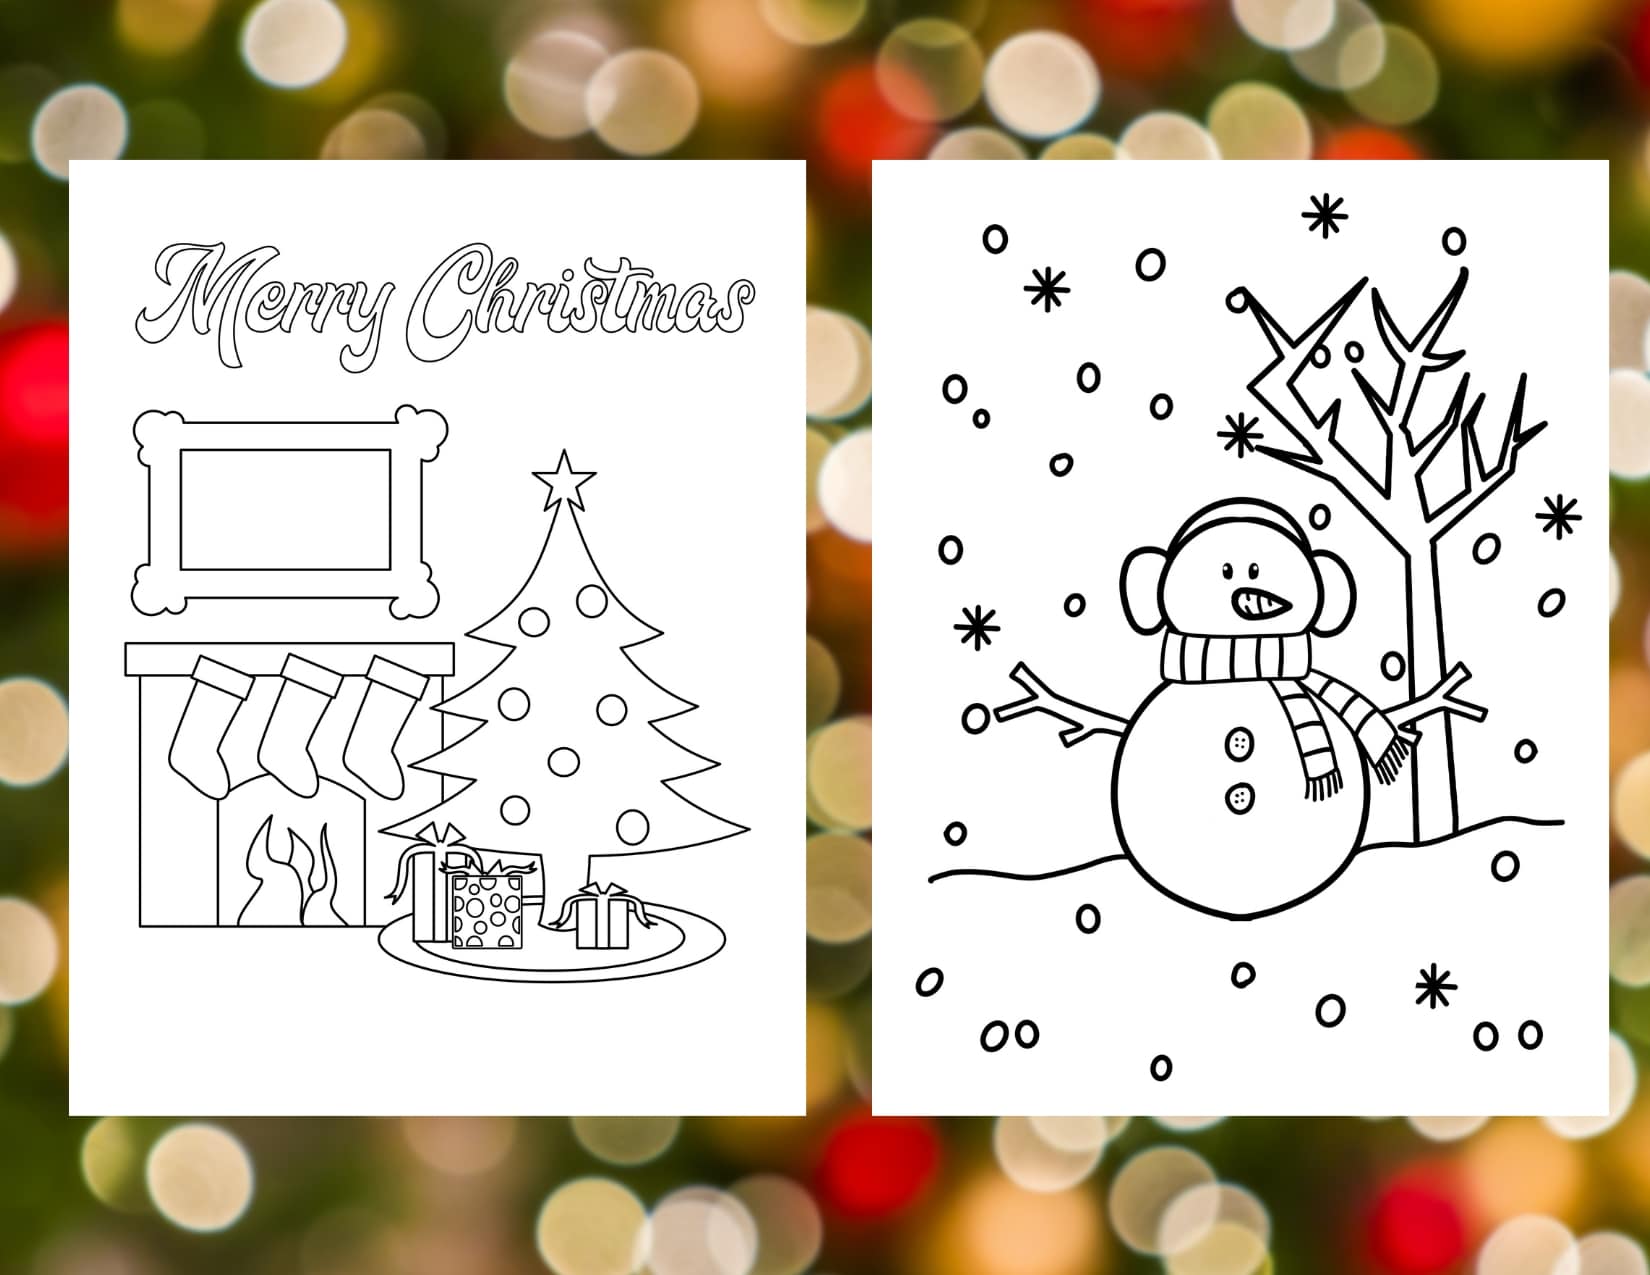 coloring pages of a snow man winter scene and one with a Christmas tree in the living room by a fireplace with presents